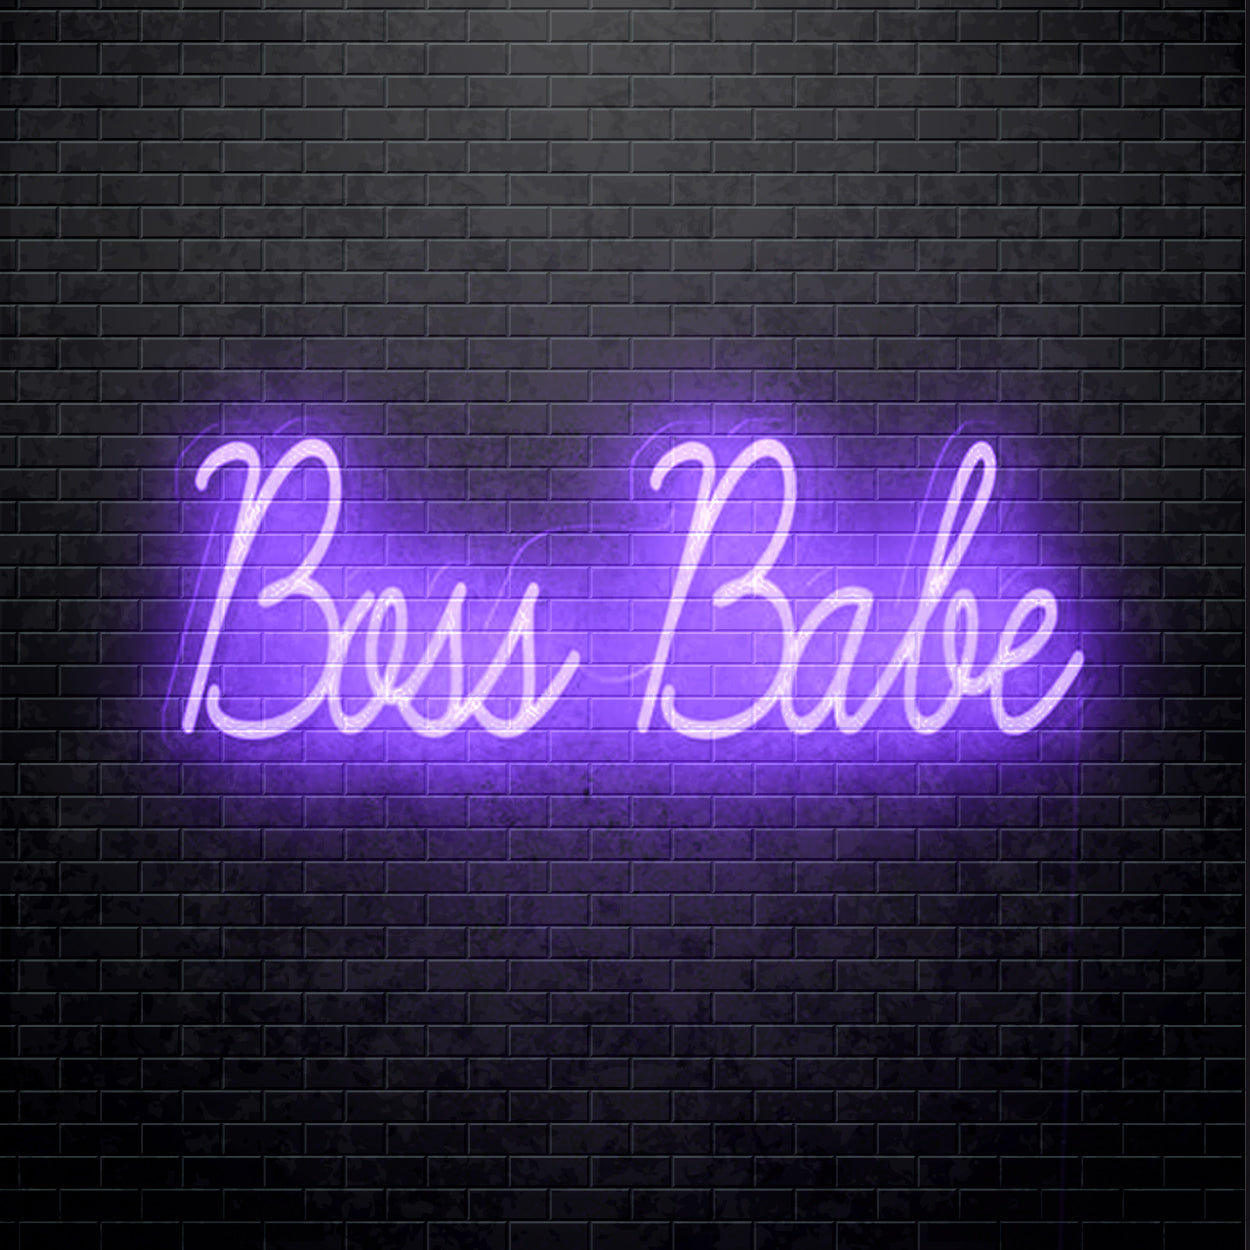 LED Neon sign - Boss Babe